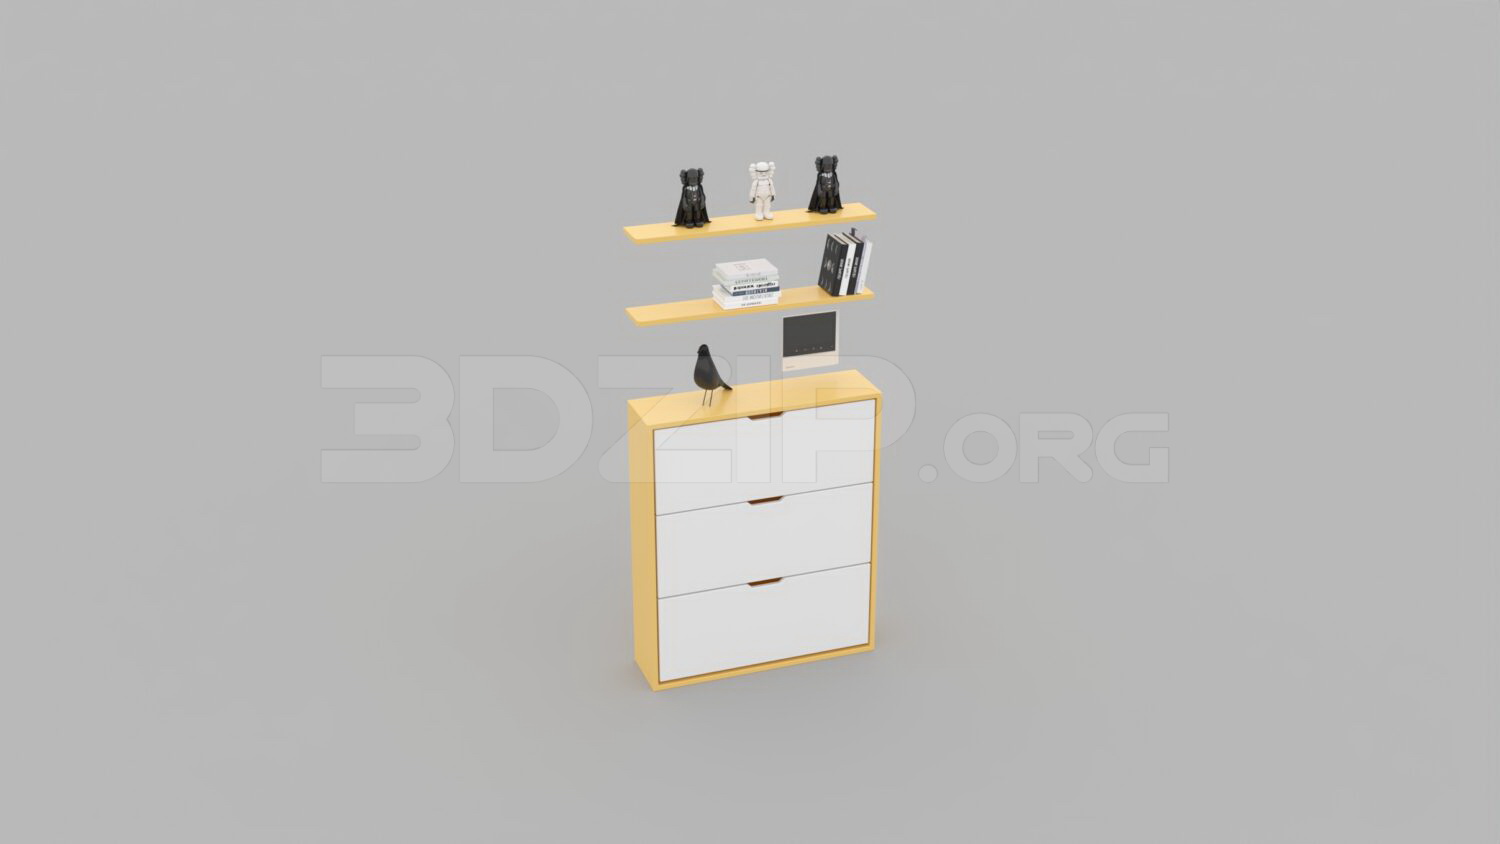 1450. Download Free Display Cabinets Model By Brian Vu